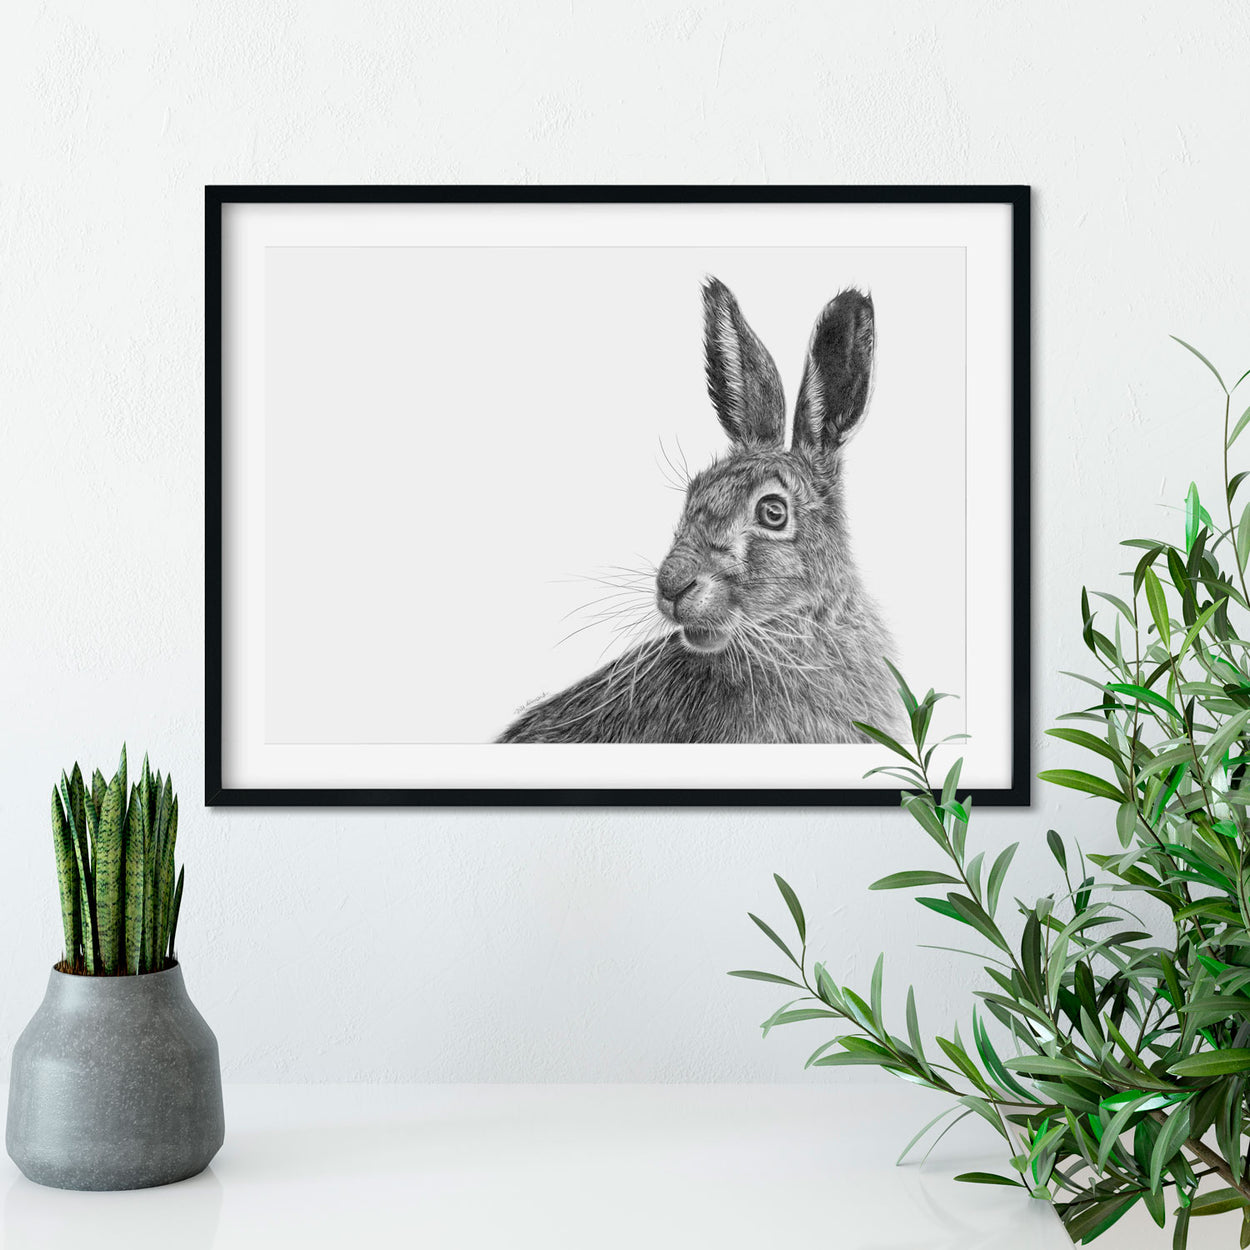 Original Hare Graphite Drawing on Wall - The Thriving Wild